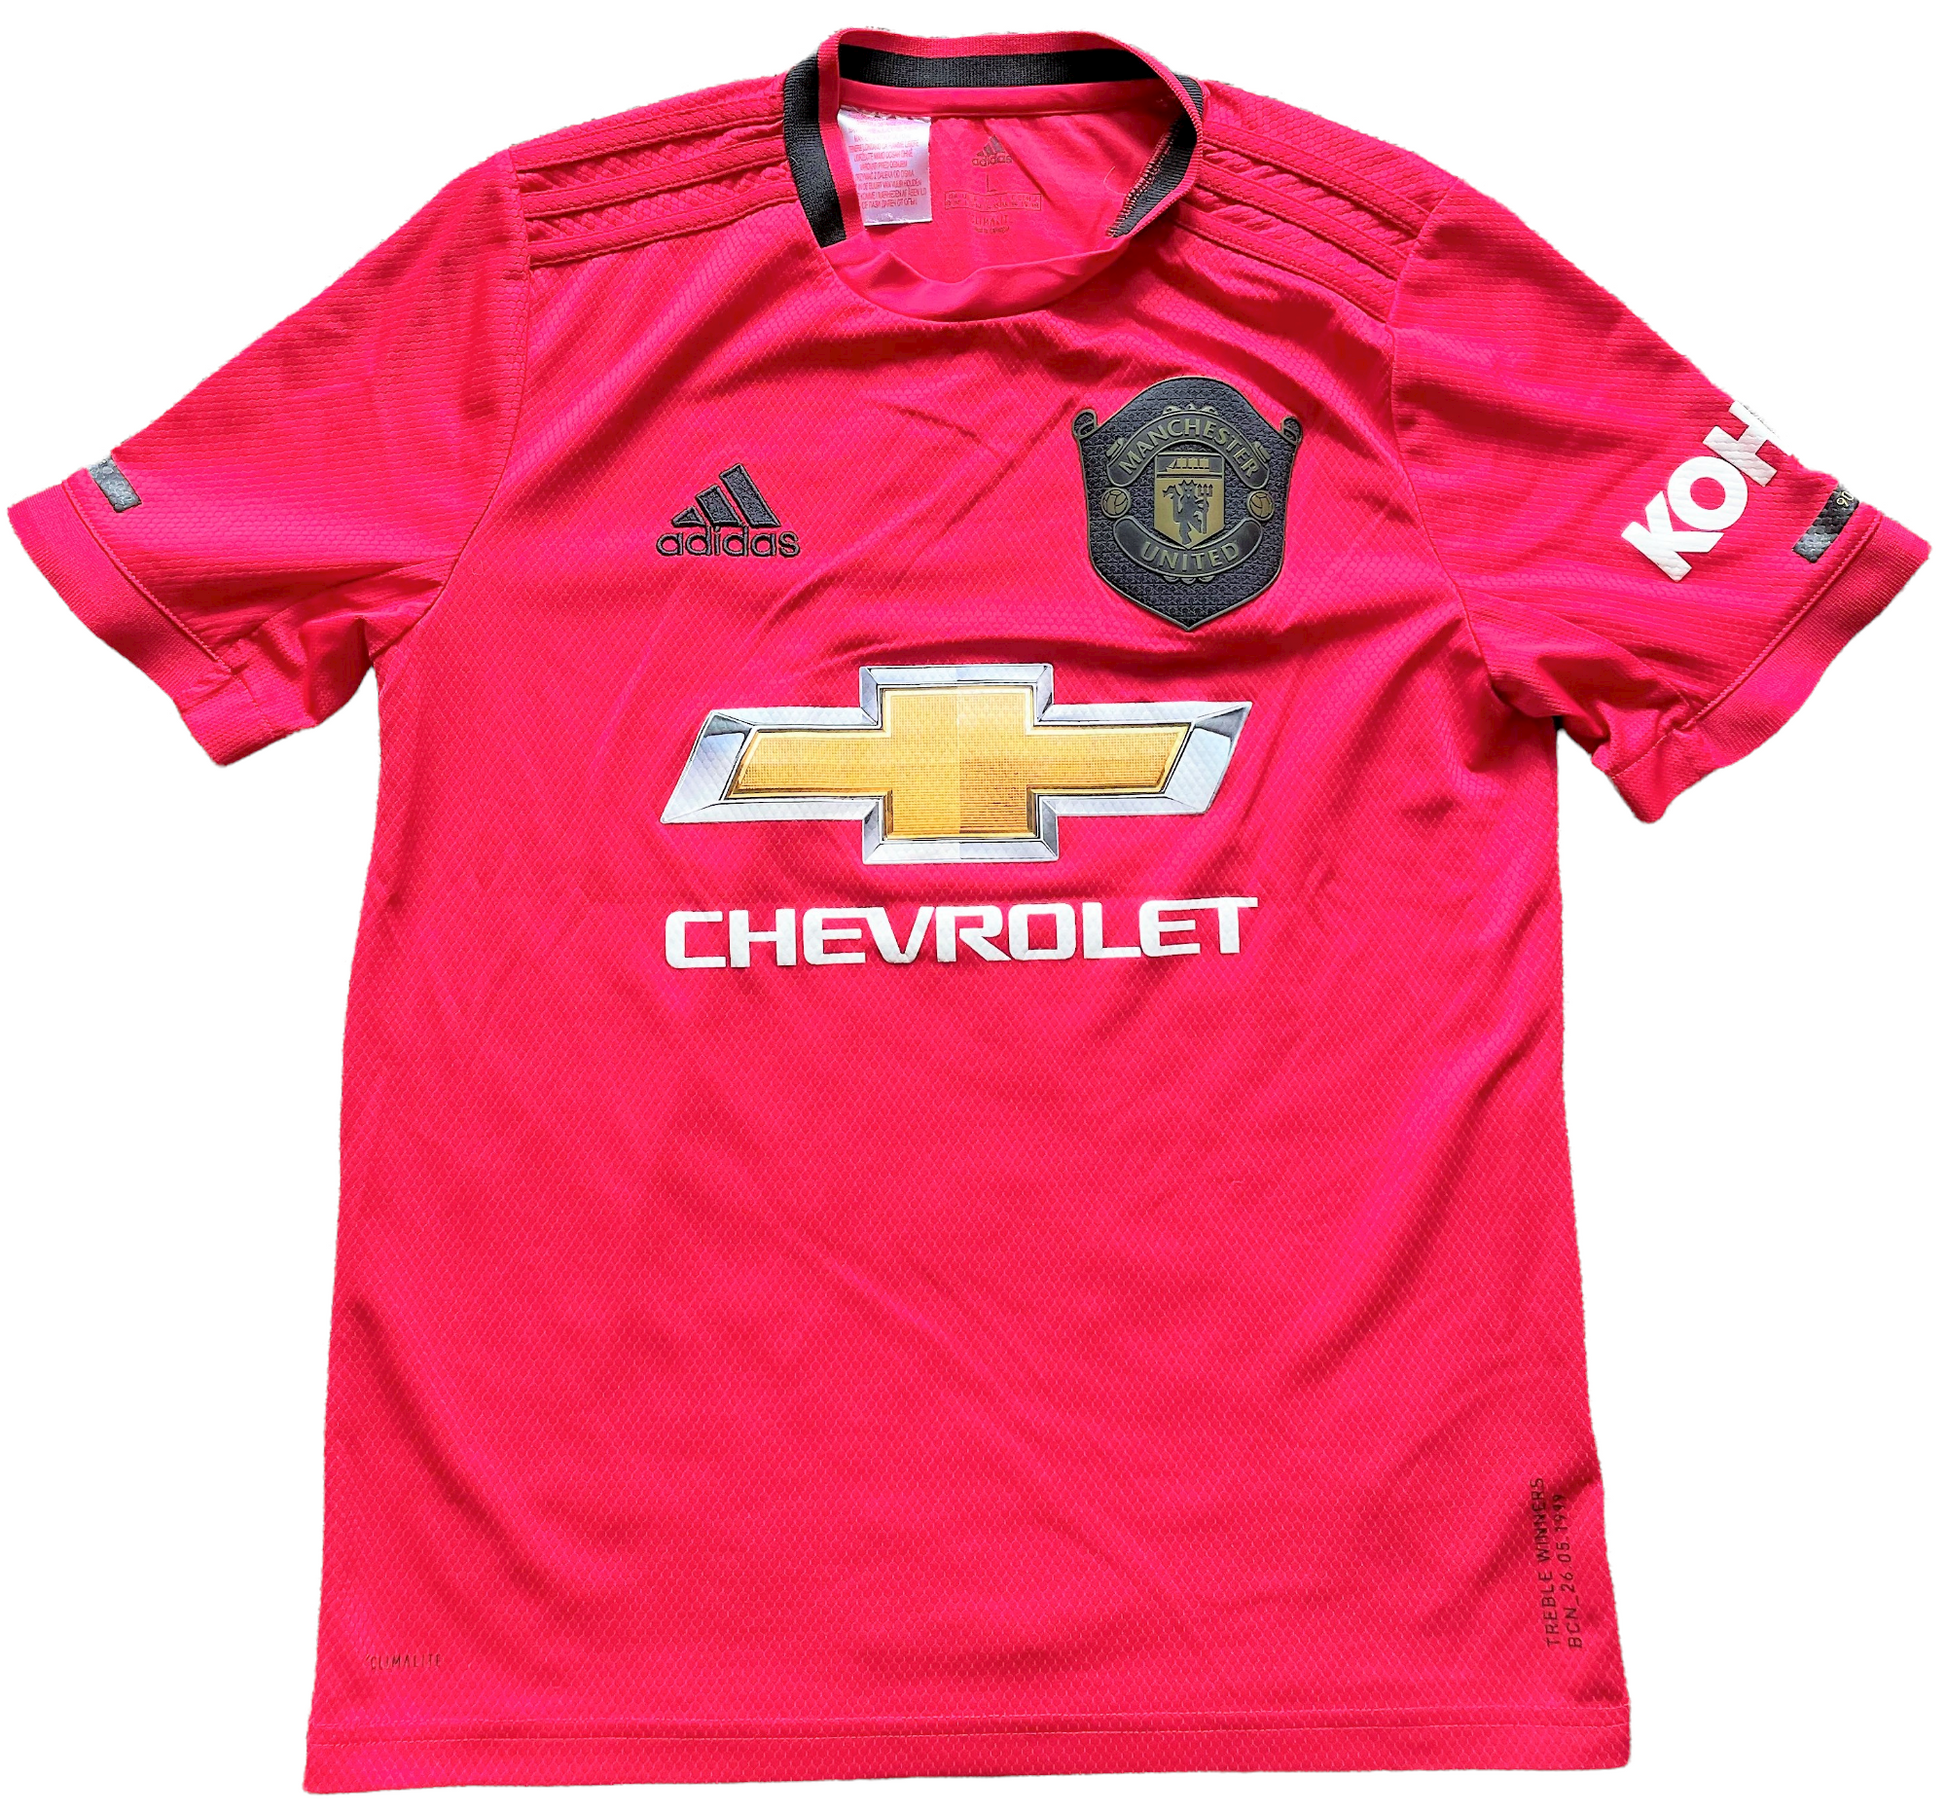 2019-20 Man United Shirts 2019-20 (excellent) Youths 13-14